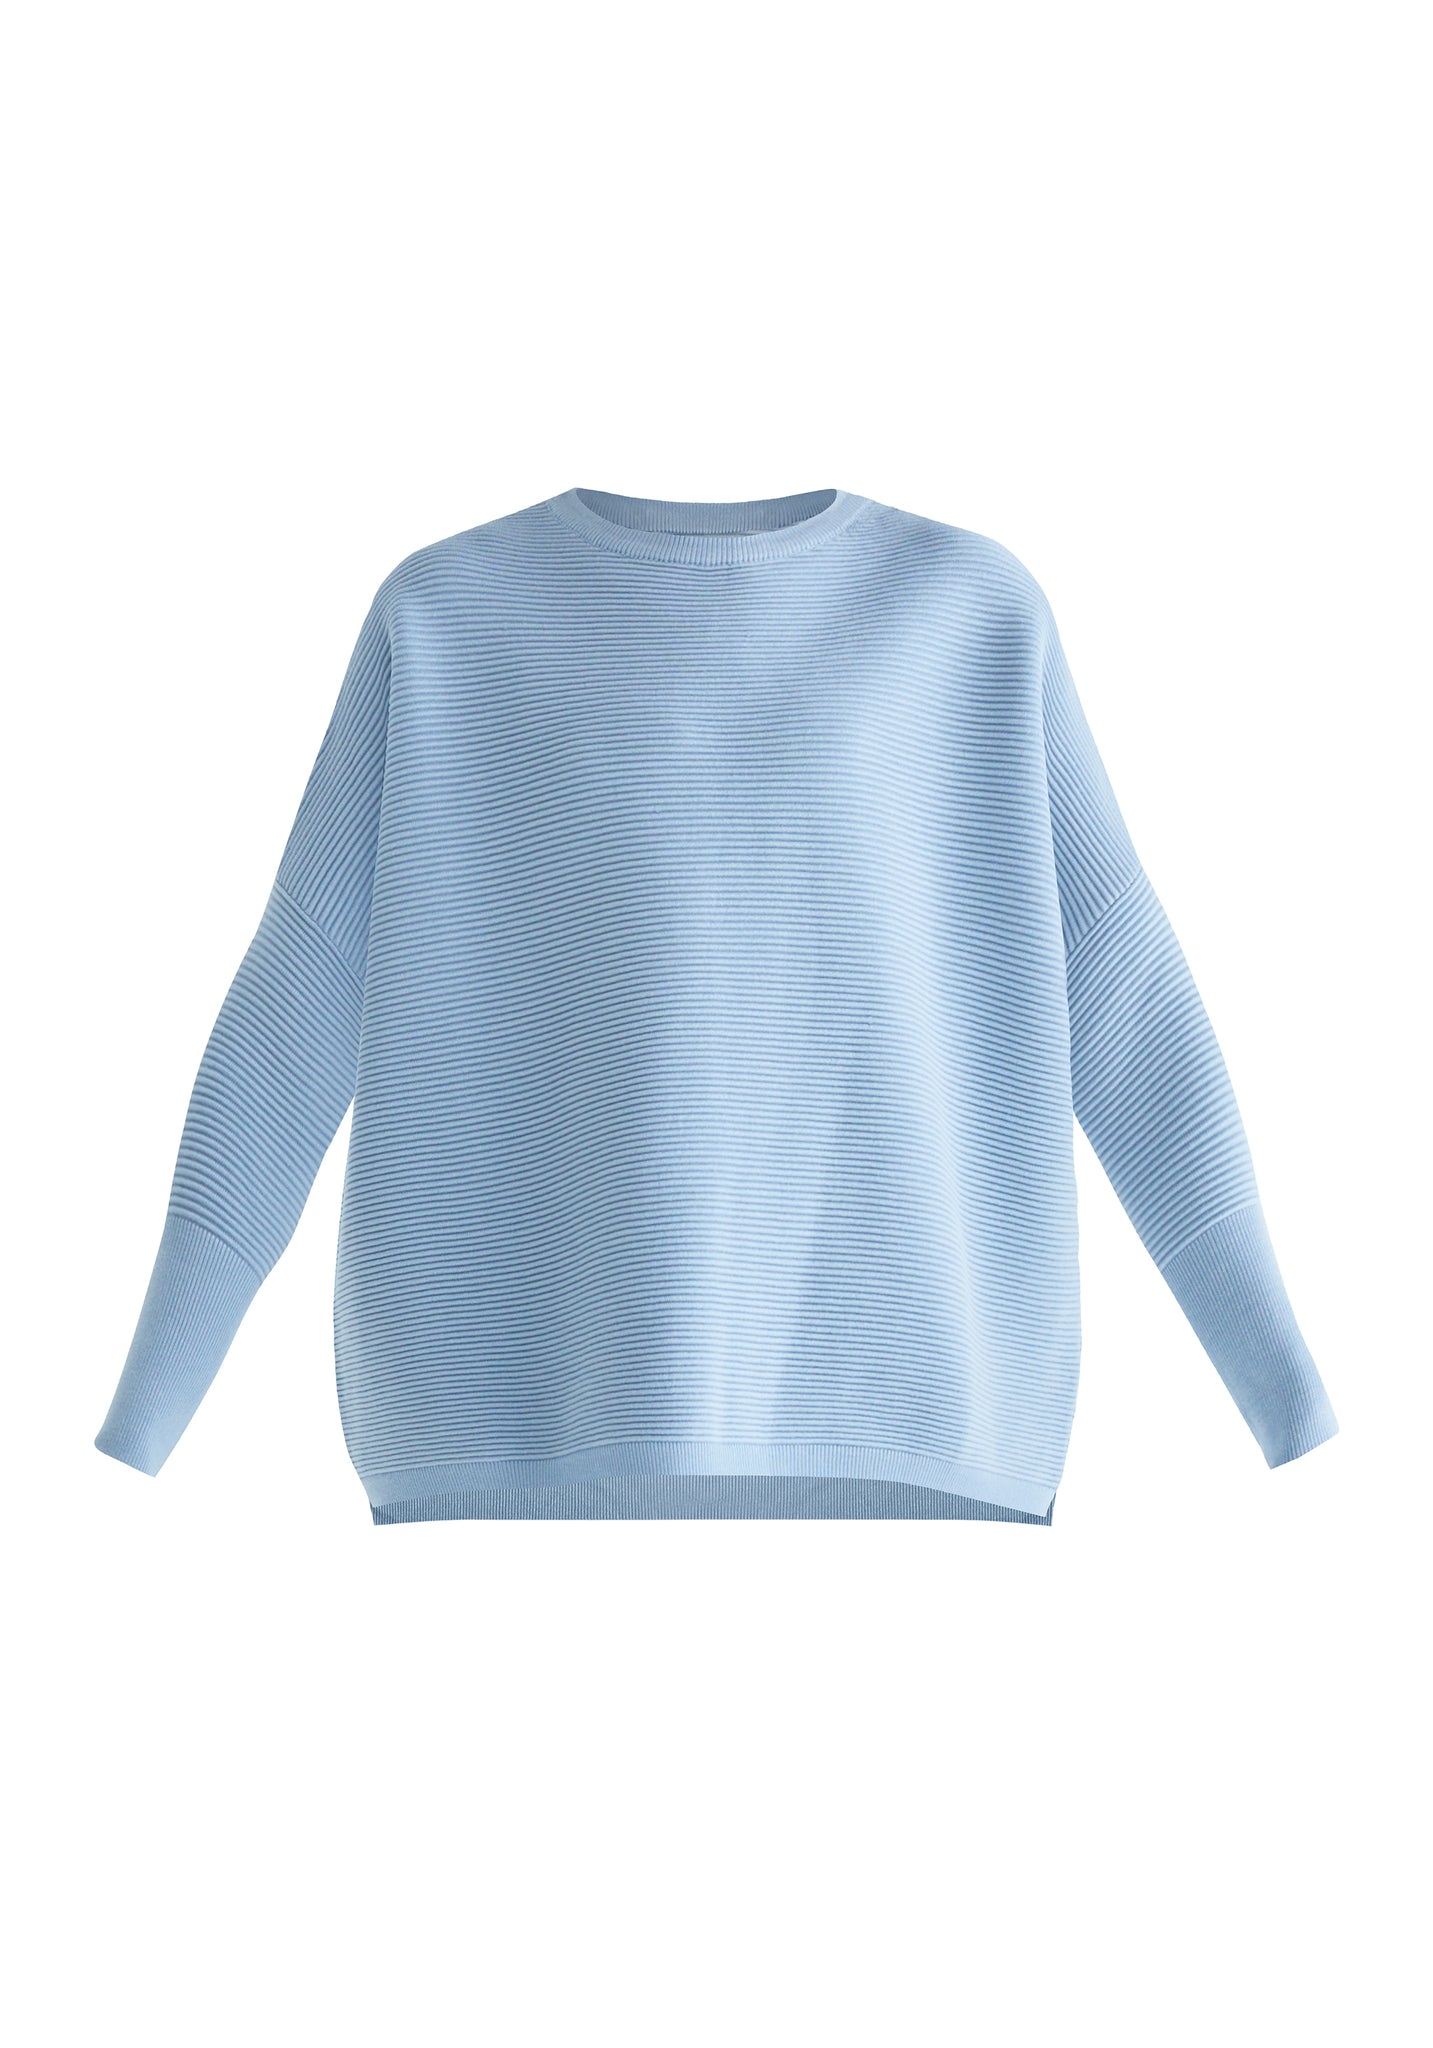 Paisie Ribbed Oversized Knit Jumper in Light Blue | Knitwear | Paisie